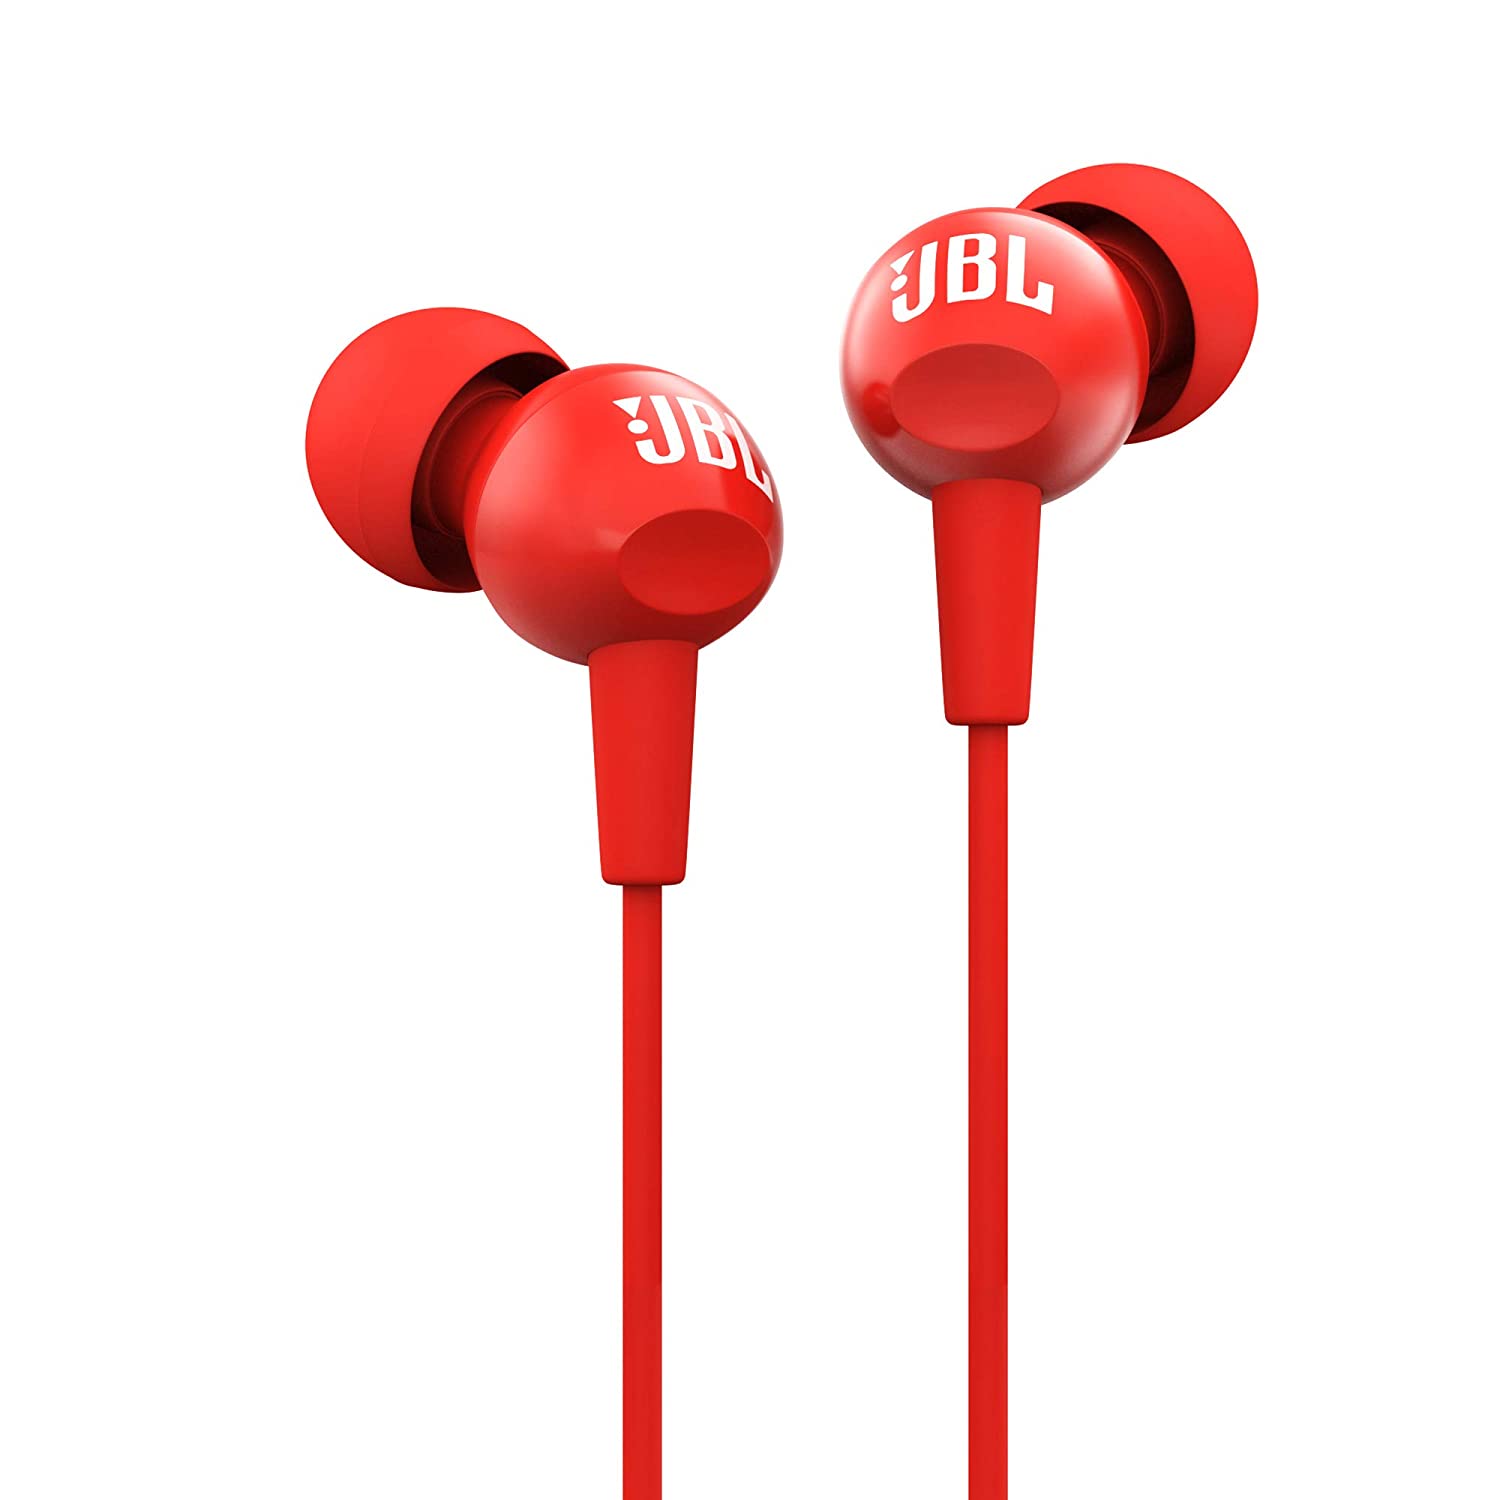 JBL C100SI Wired Headset | JBL C100SI In-Ear Headphone, Light Weight And Comfortable, Brand New With Warranty